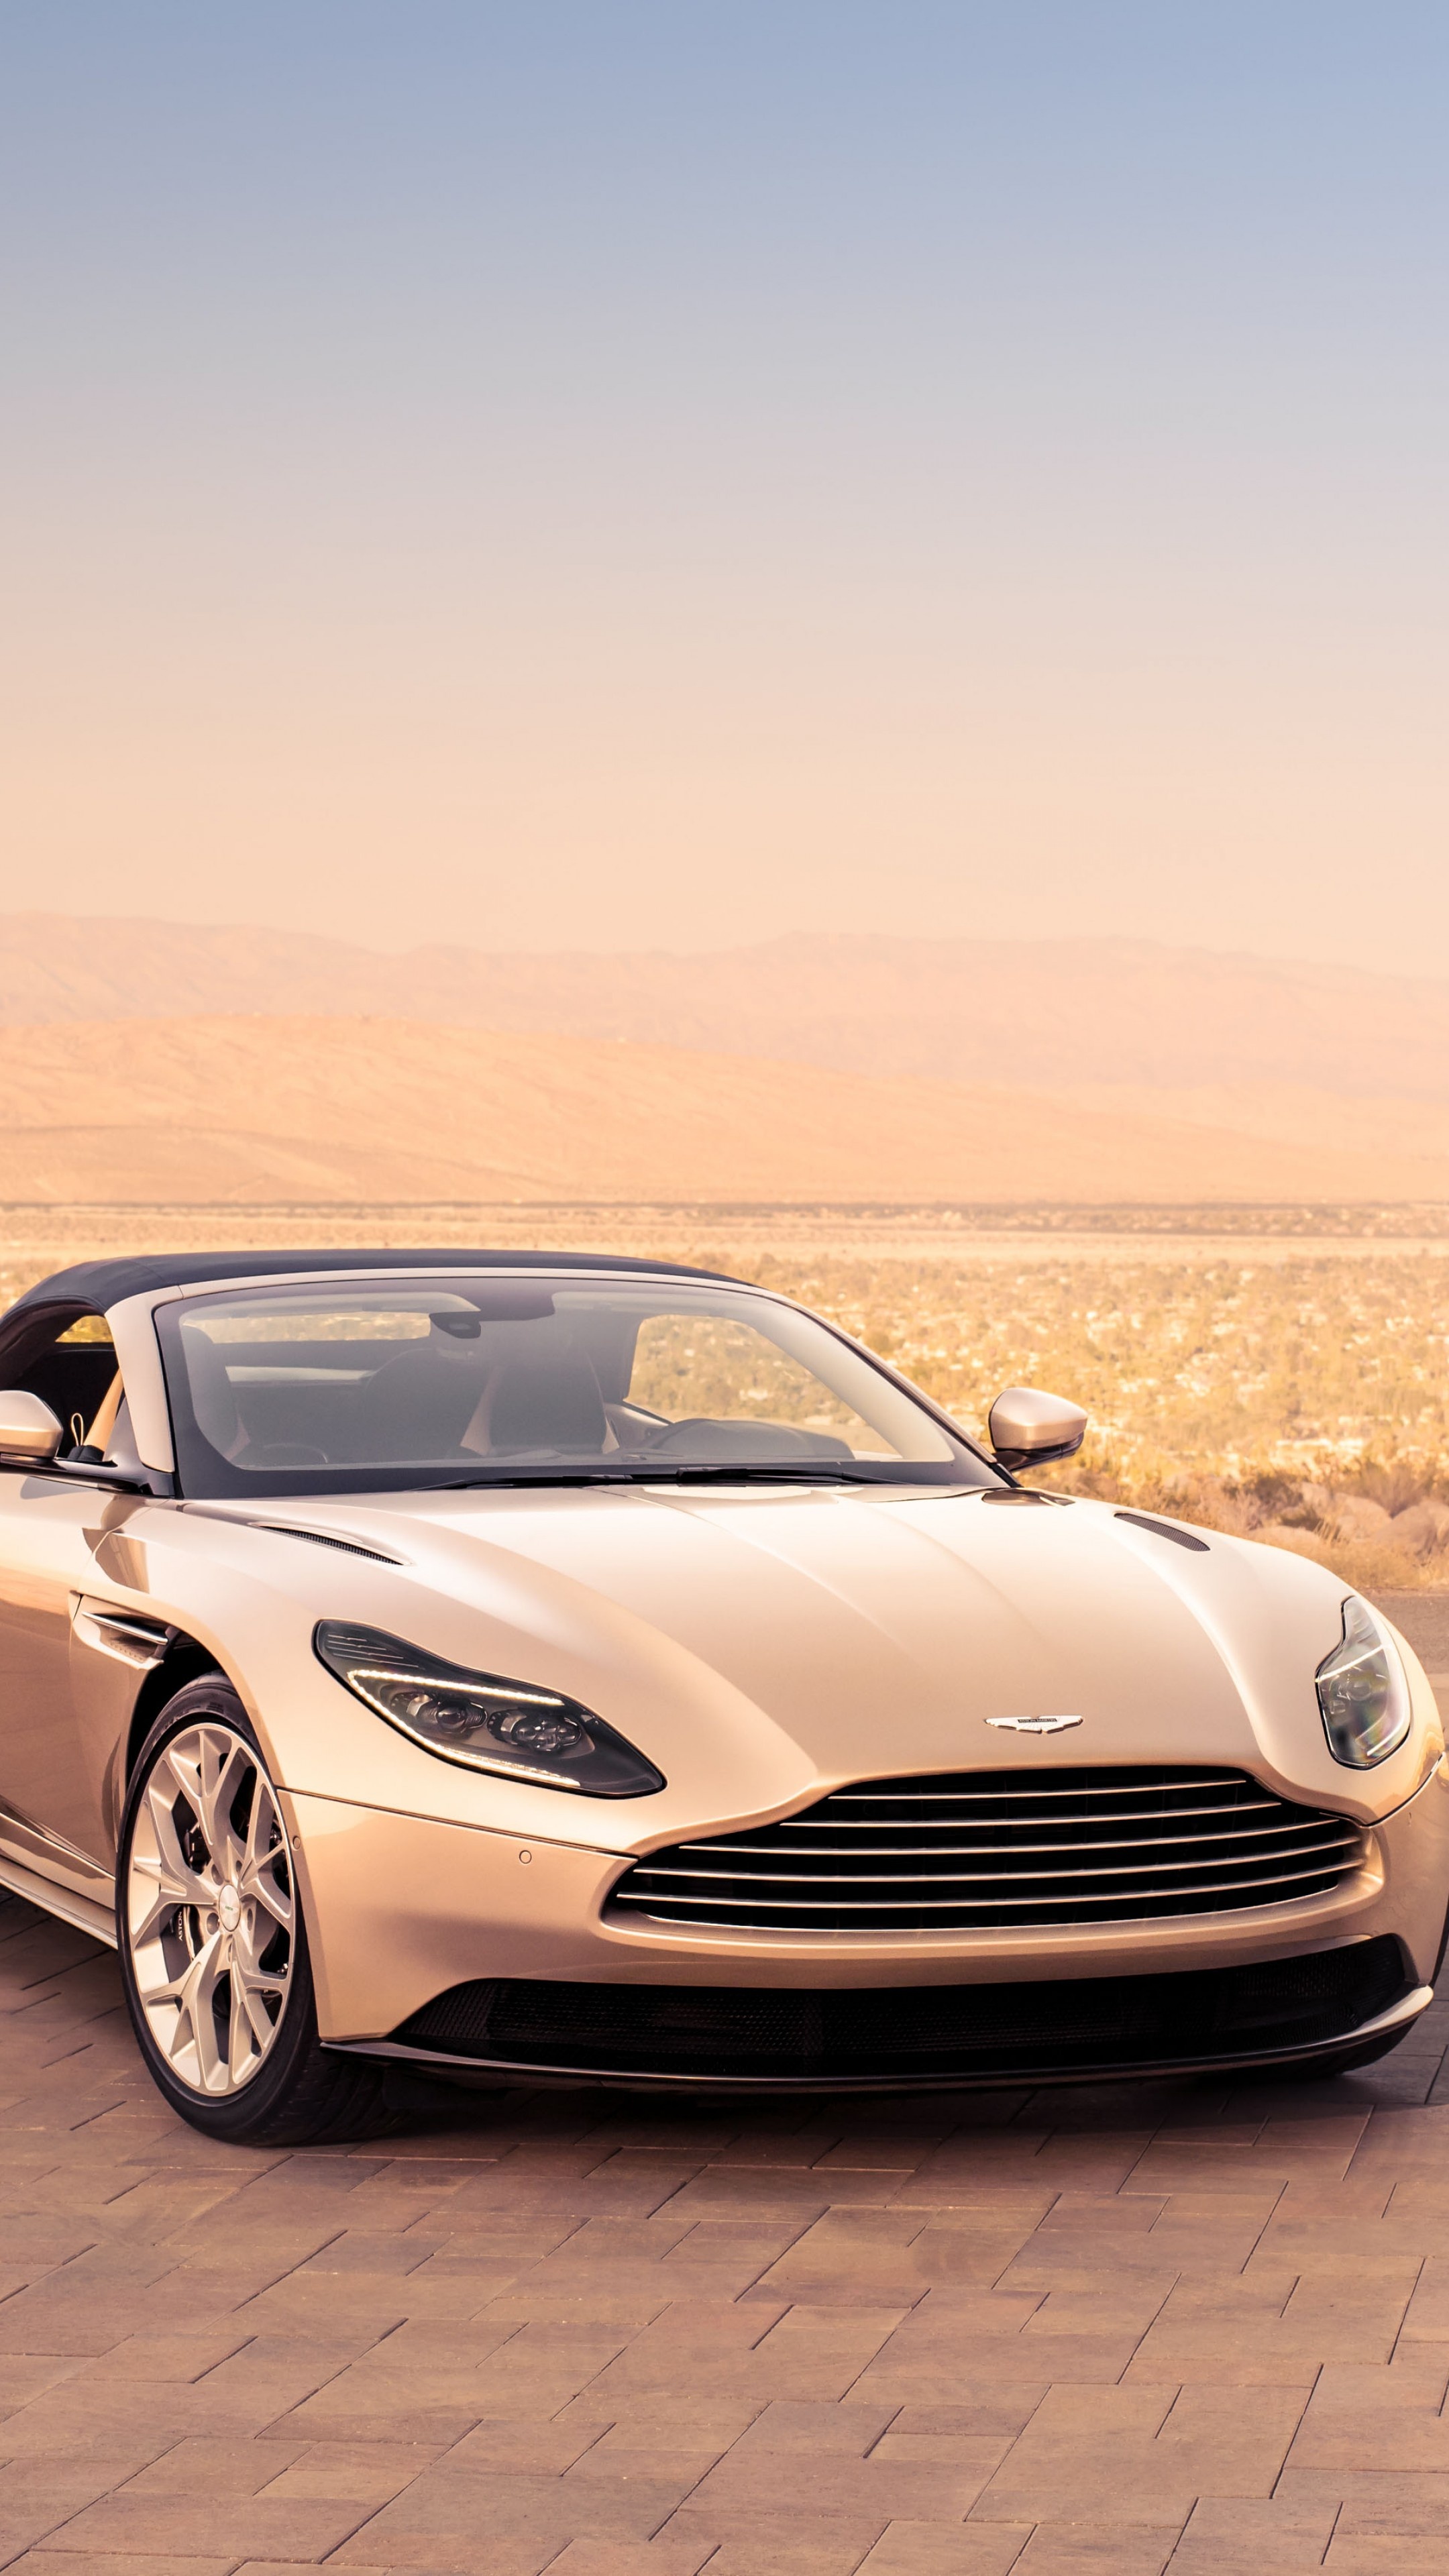 Aston Martin Vantage, Stunning wallpapers, Exquisite design, Unmatched performance, 2160x3840 4K Phone